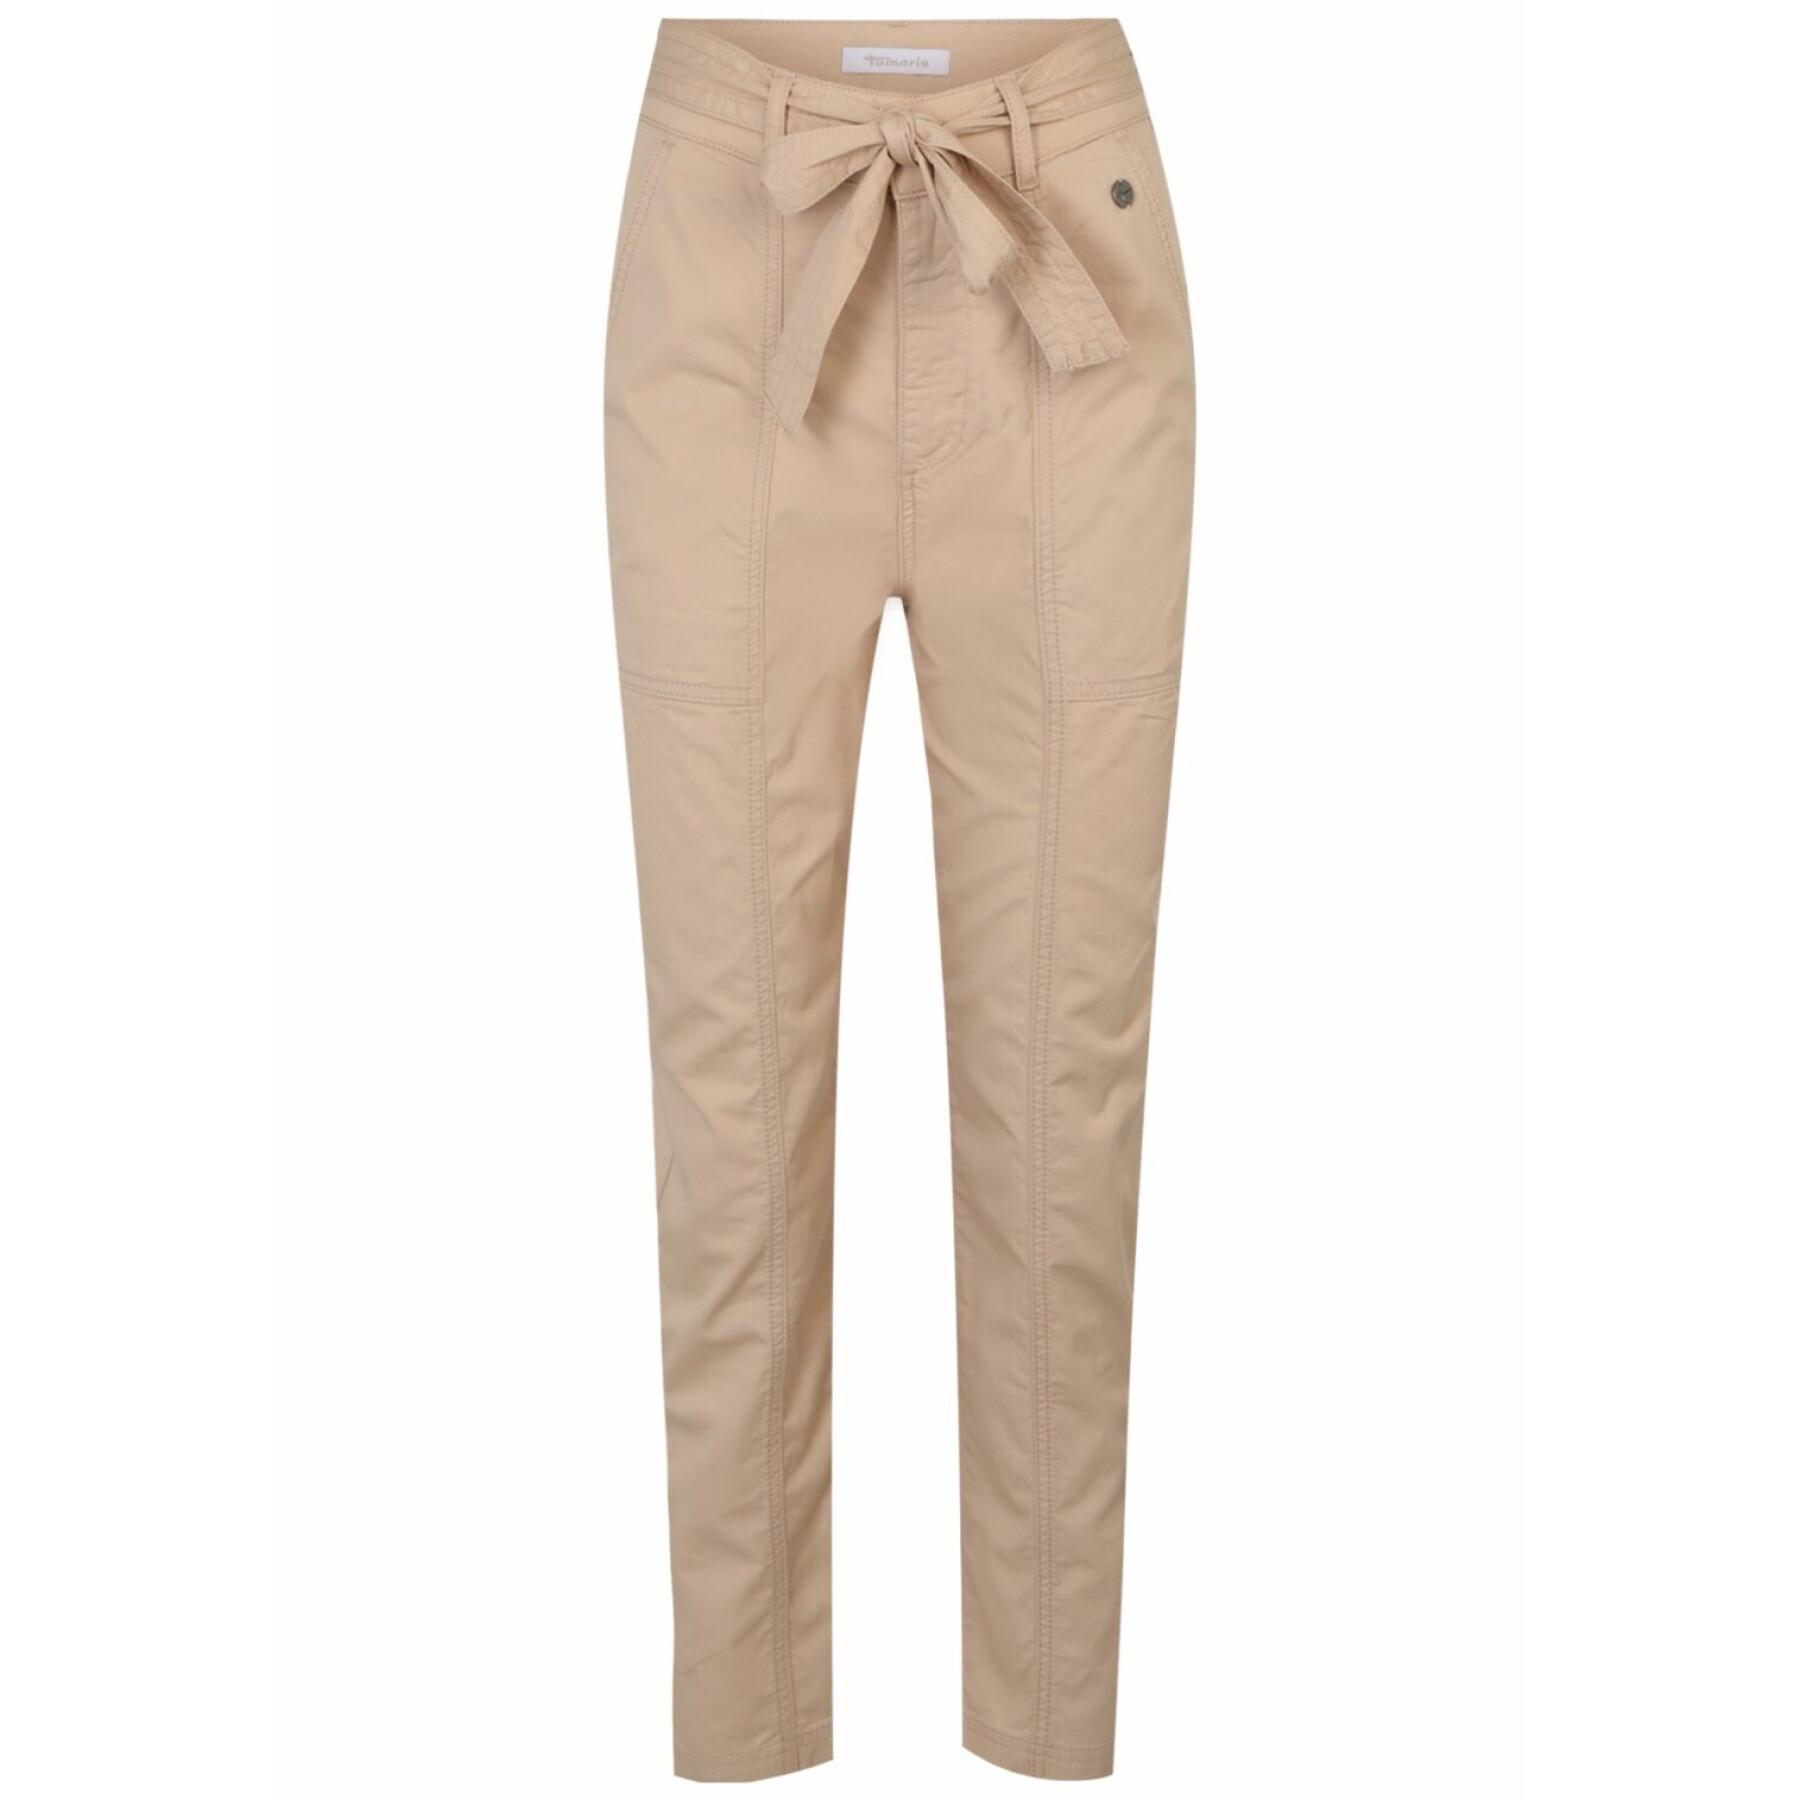 Women's chino pants Tamaris Abhar - Trousers and Jeans - Woman - Lifestyle